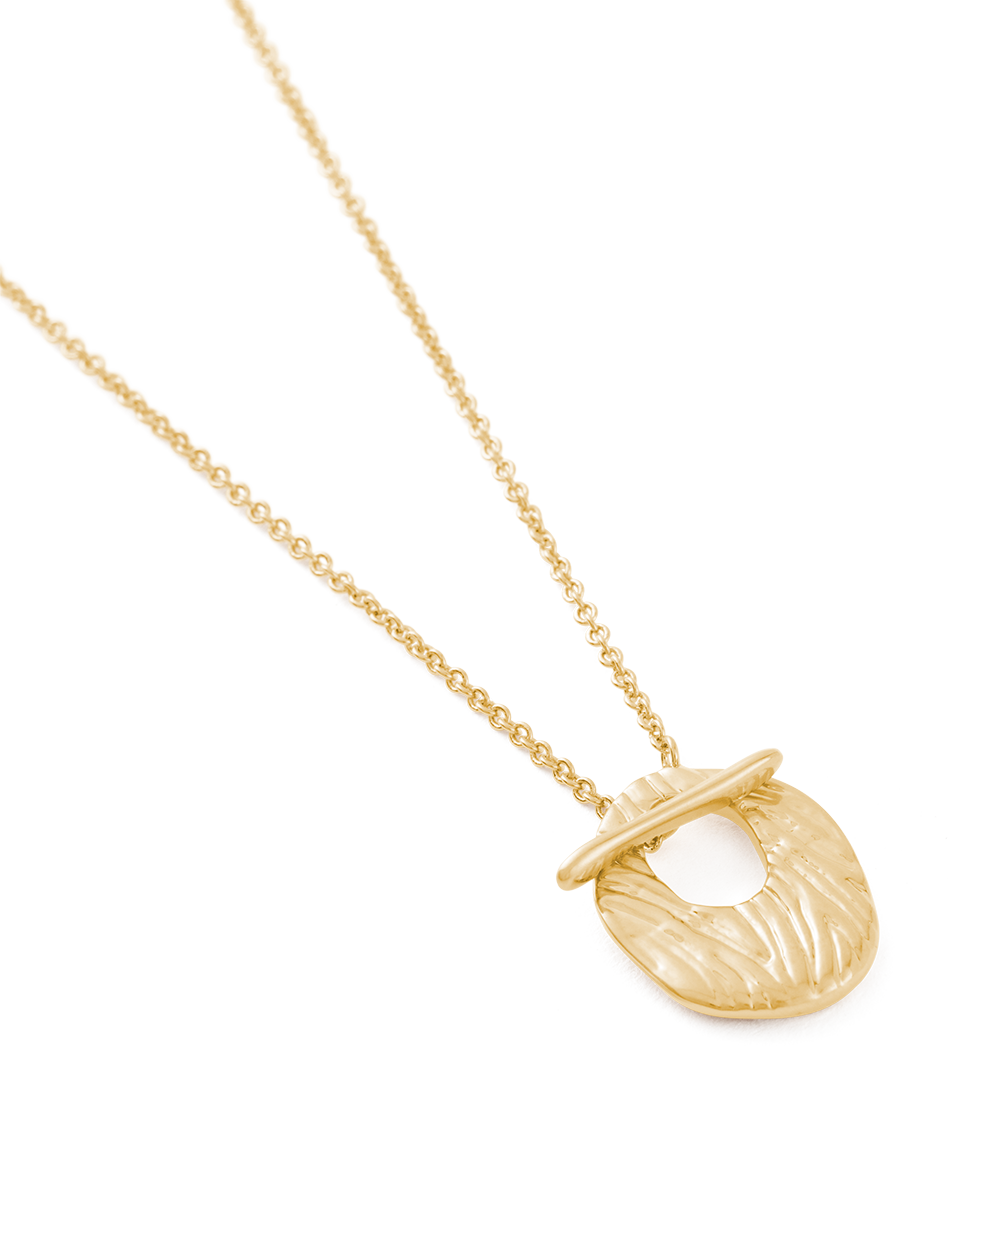 REFLECTION NECKLACE (18K GOLD PLATED)